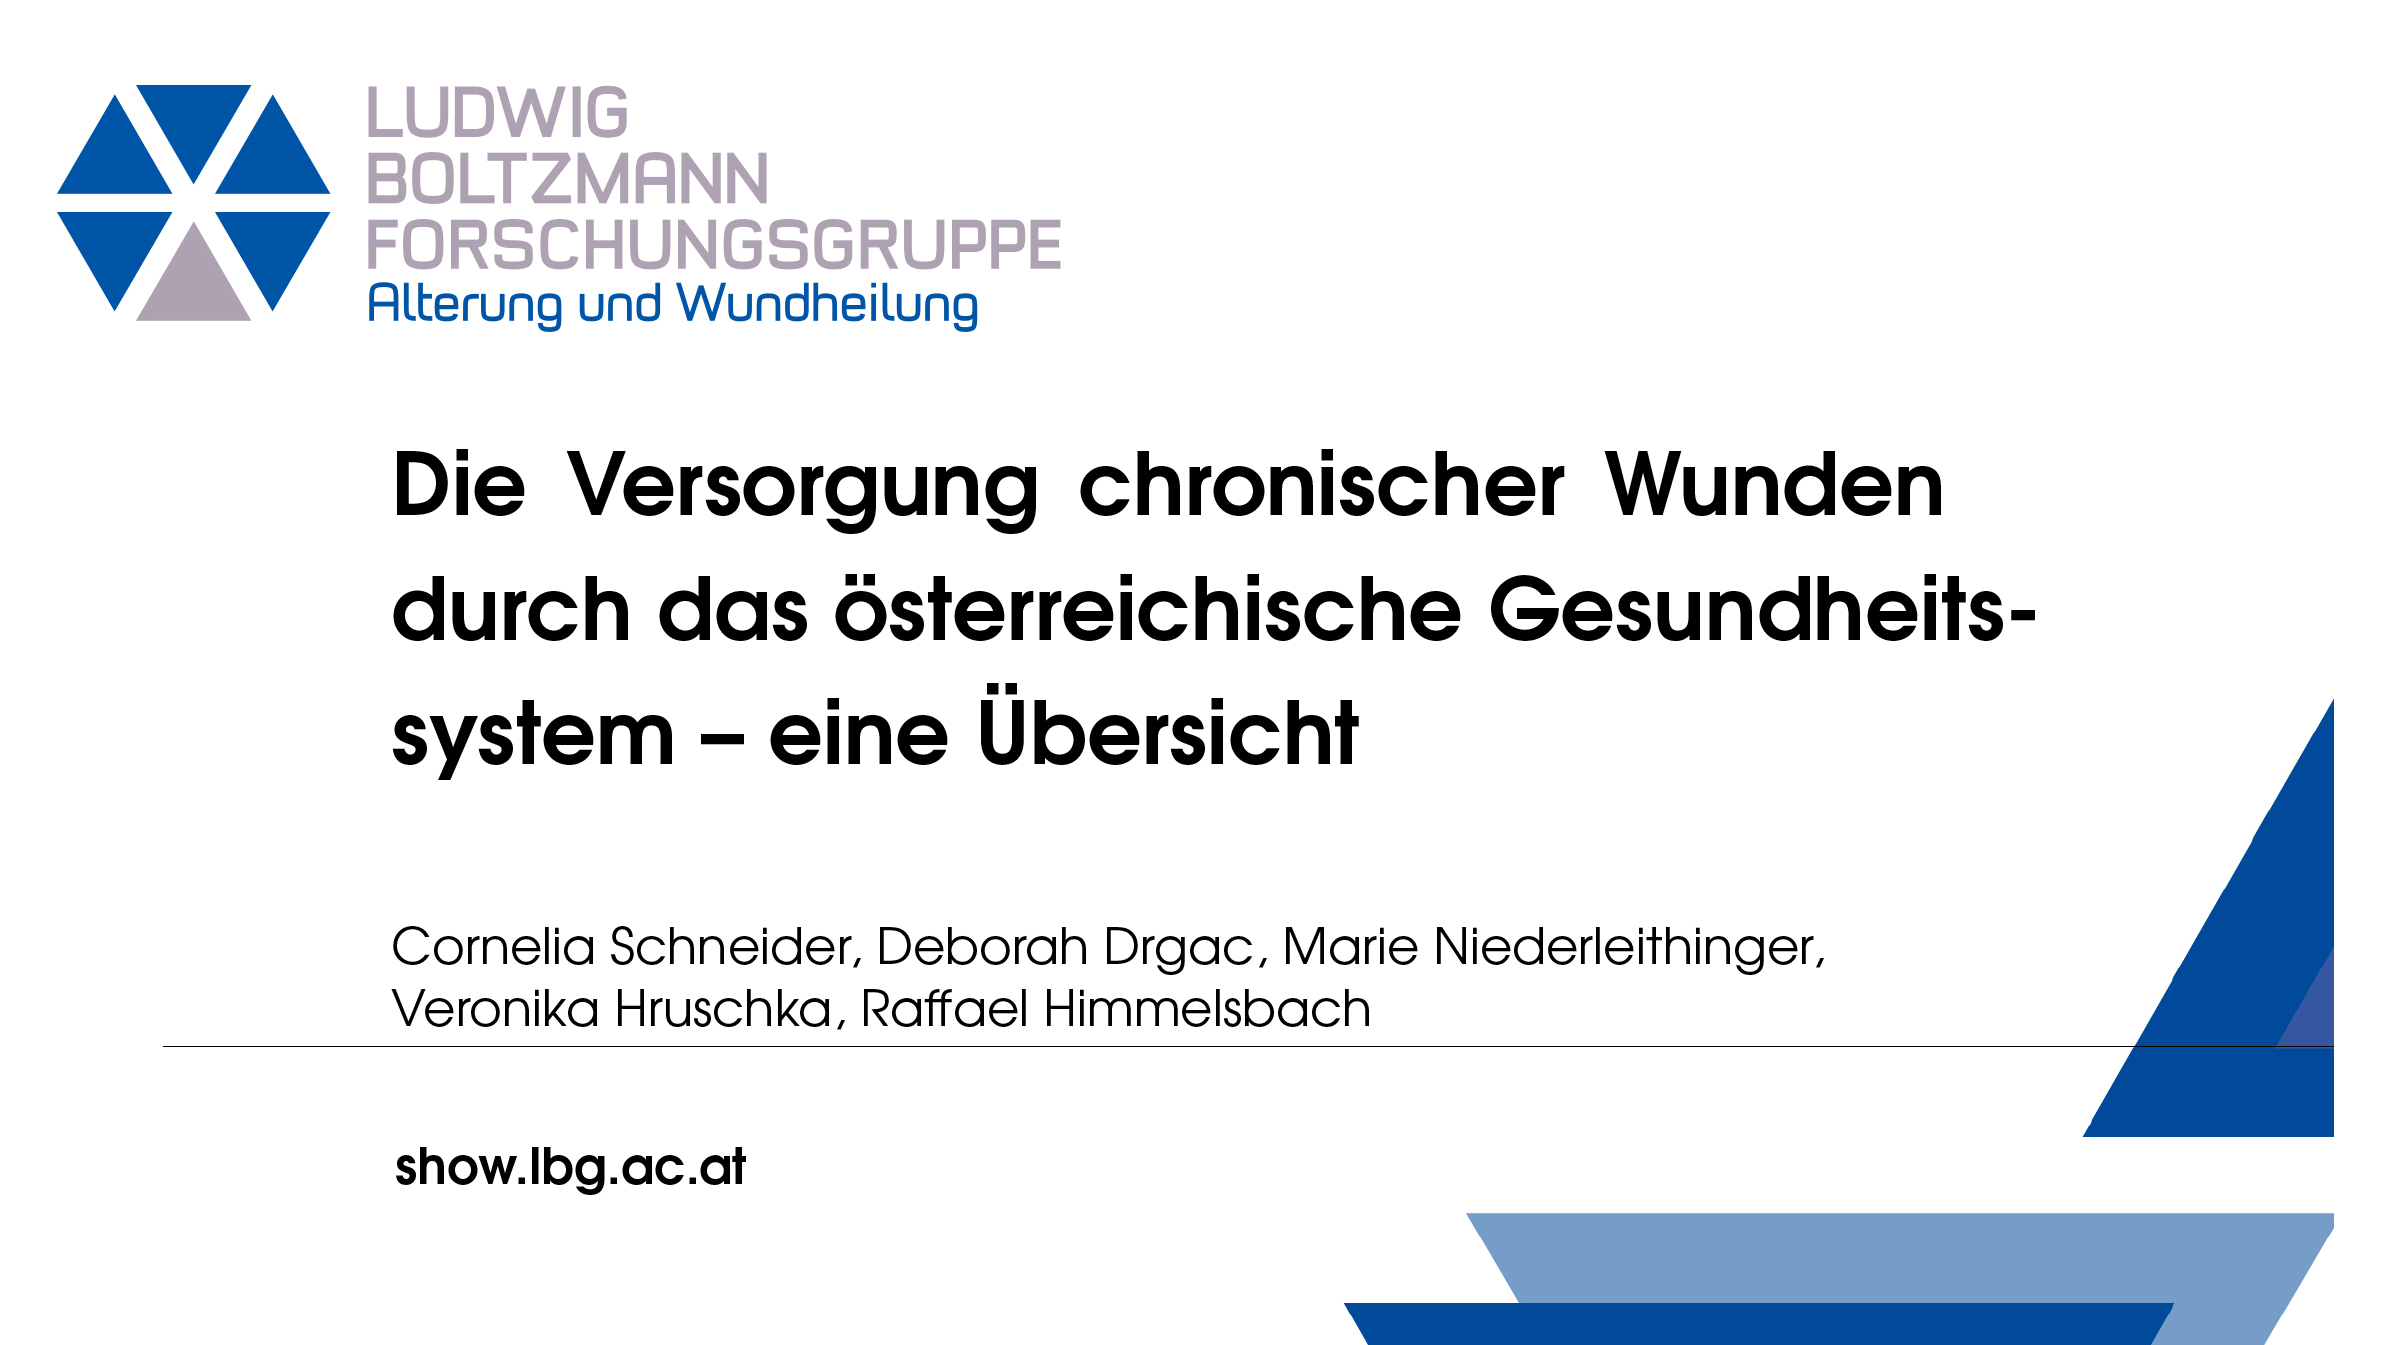 Chronic wound care within the Austrian health care system